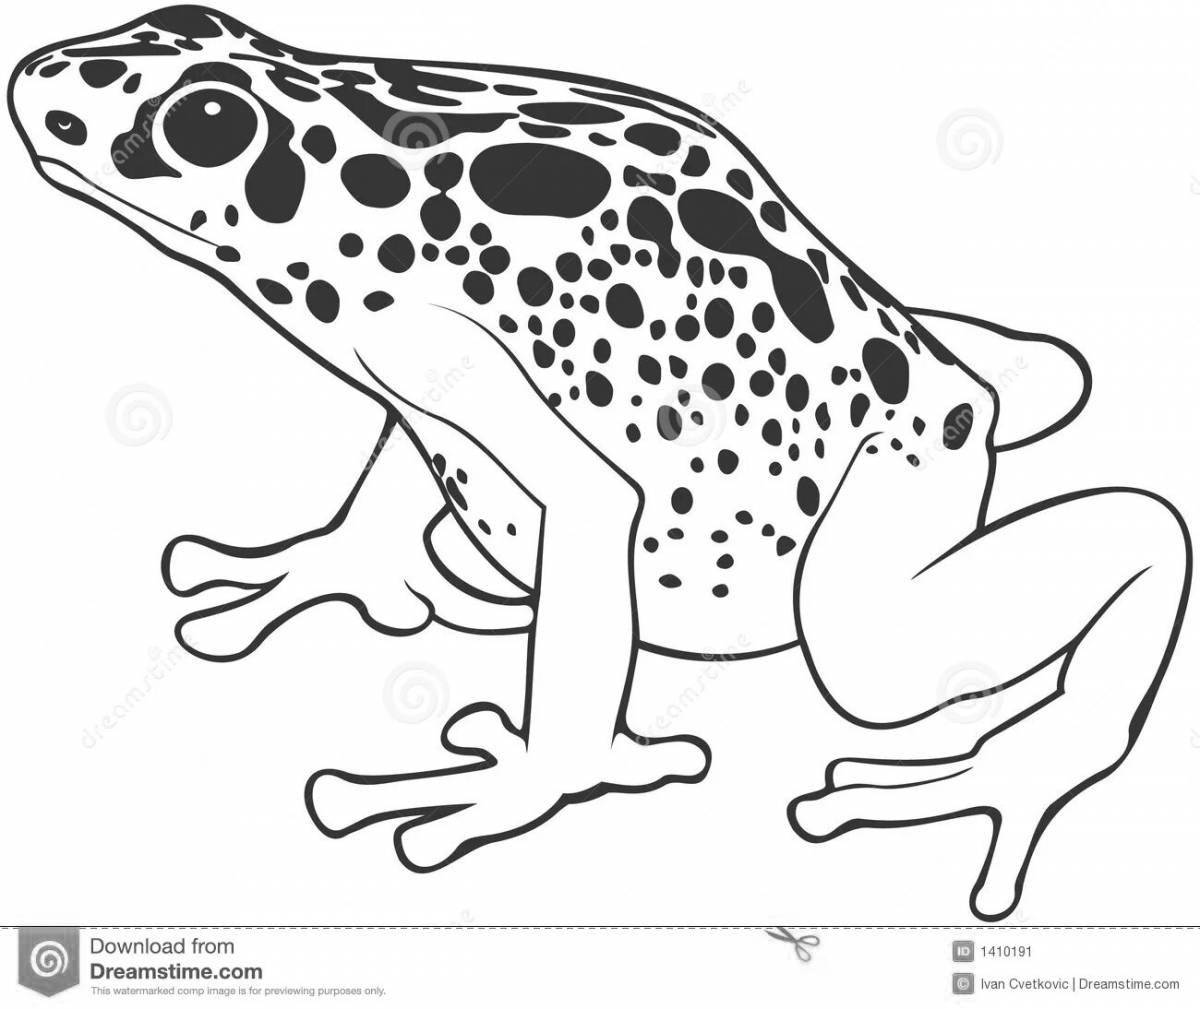 Radiant coloring page dart frog